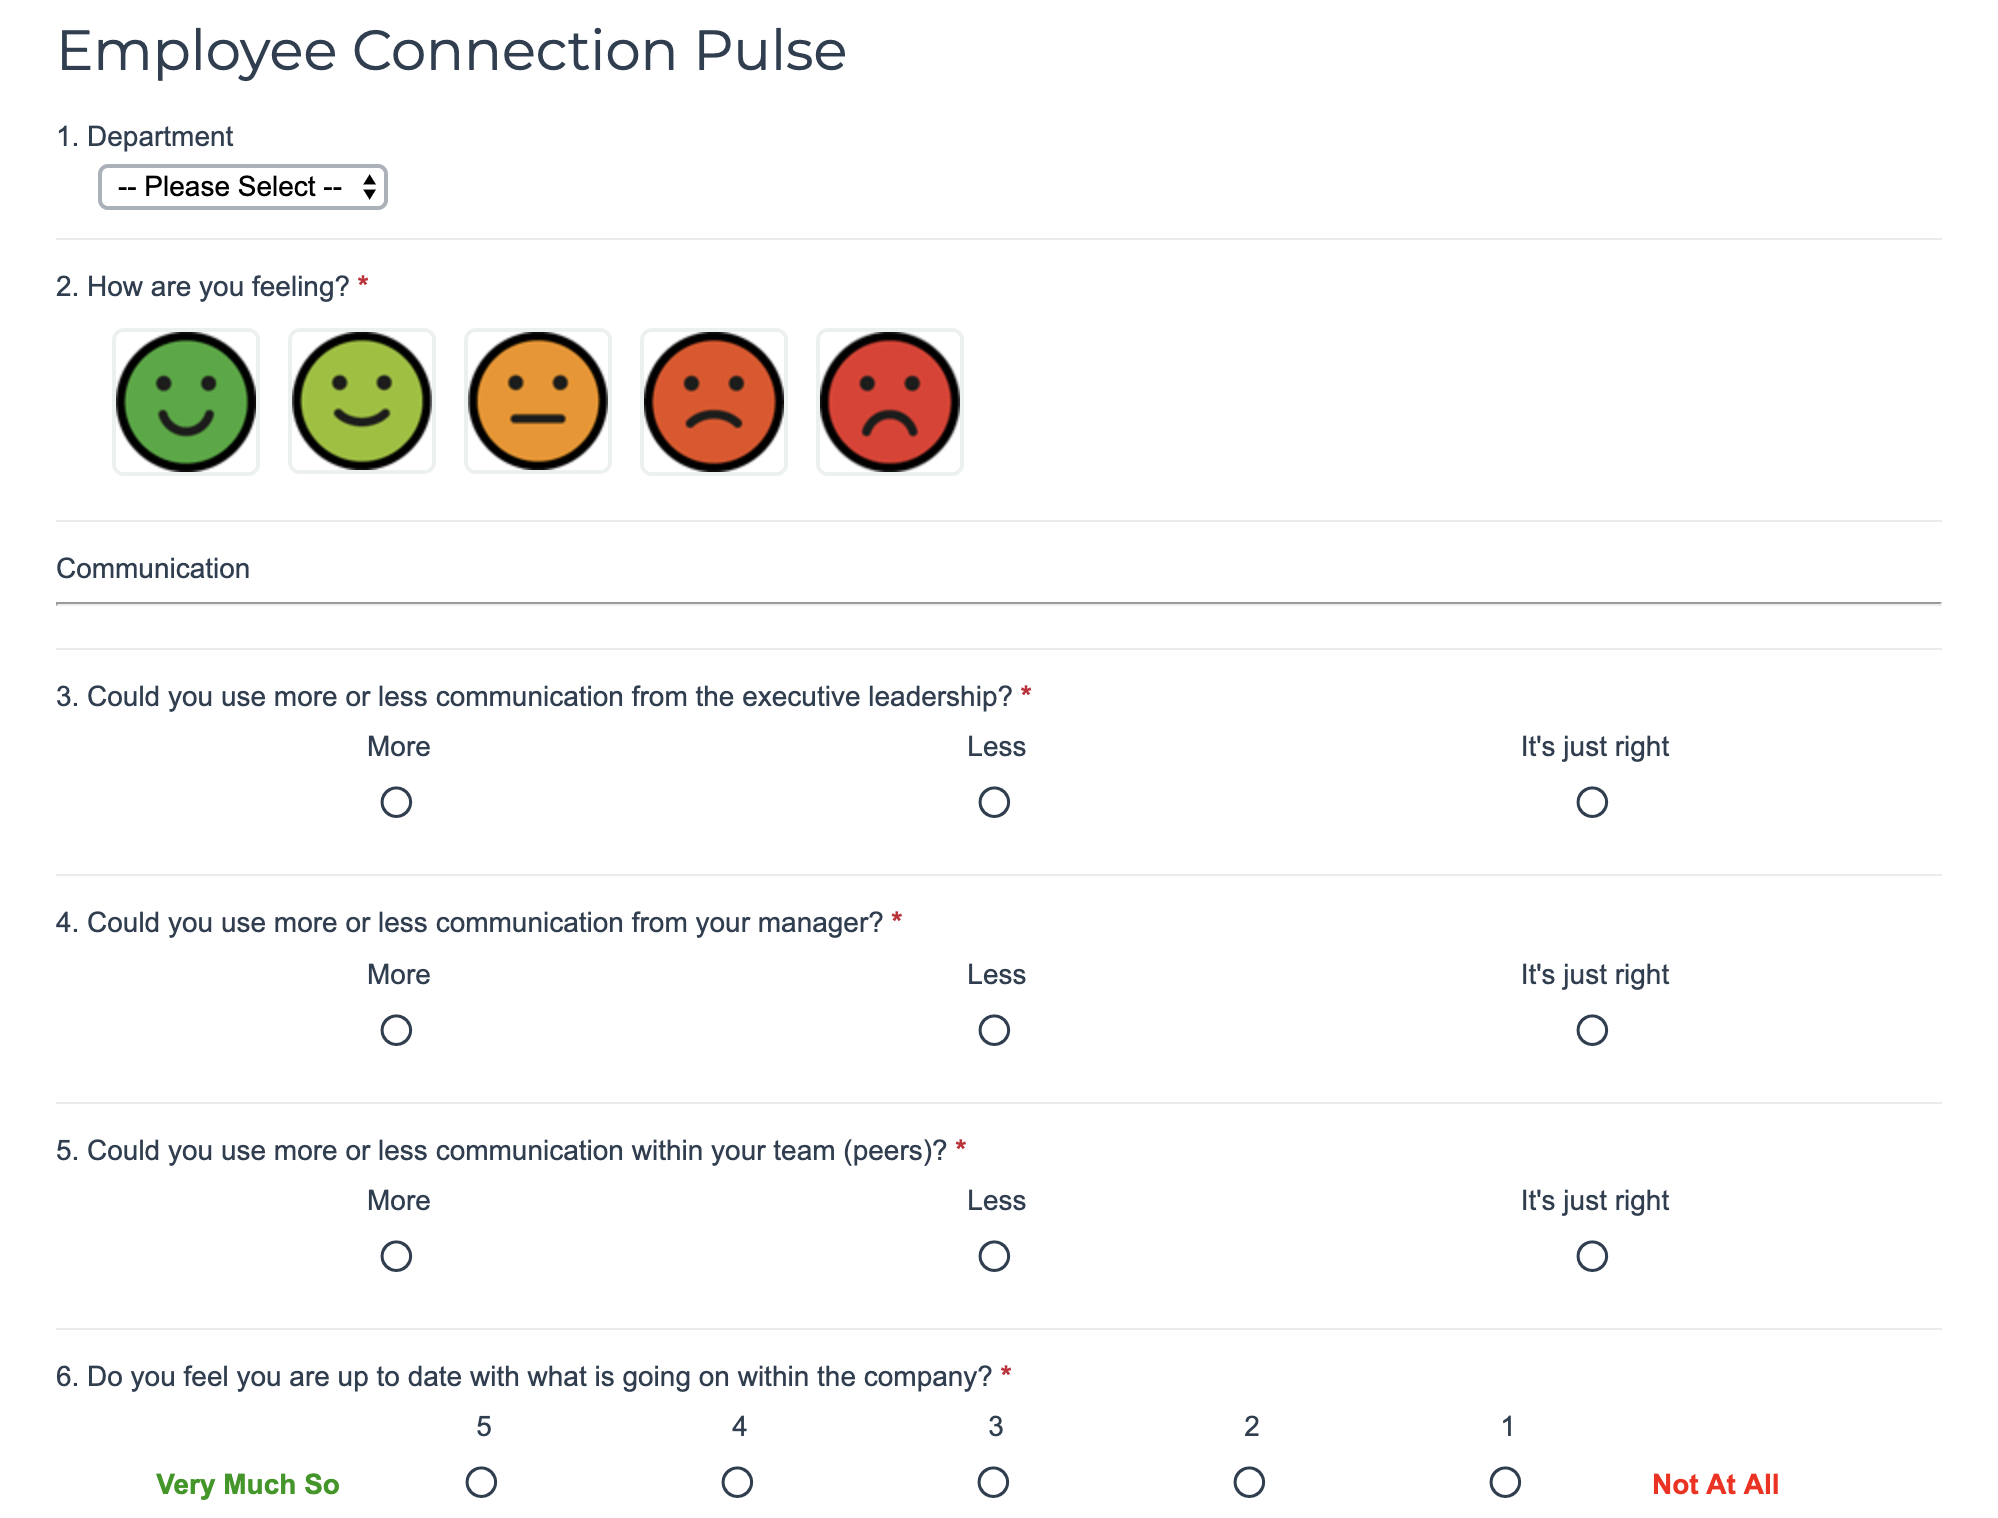 Employee Connection Pulse example